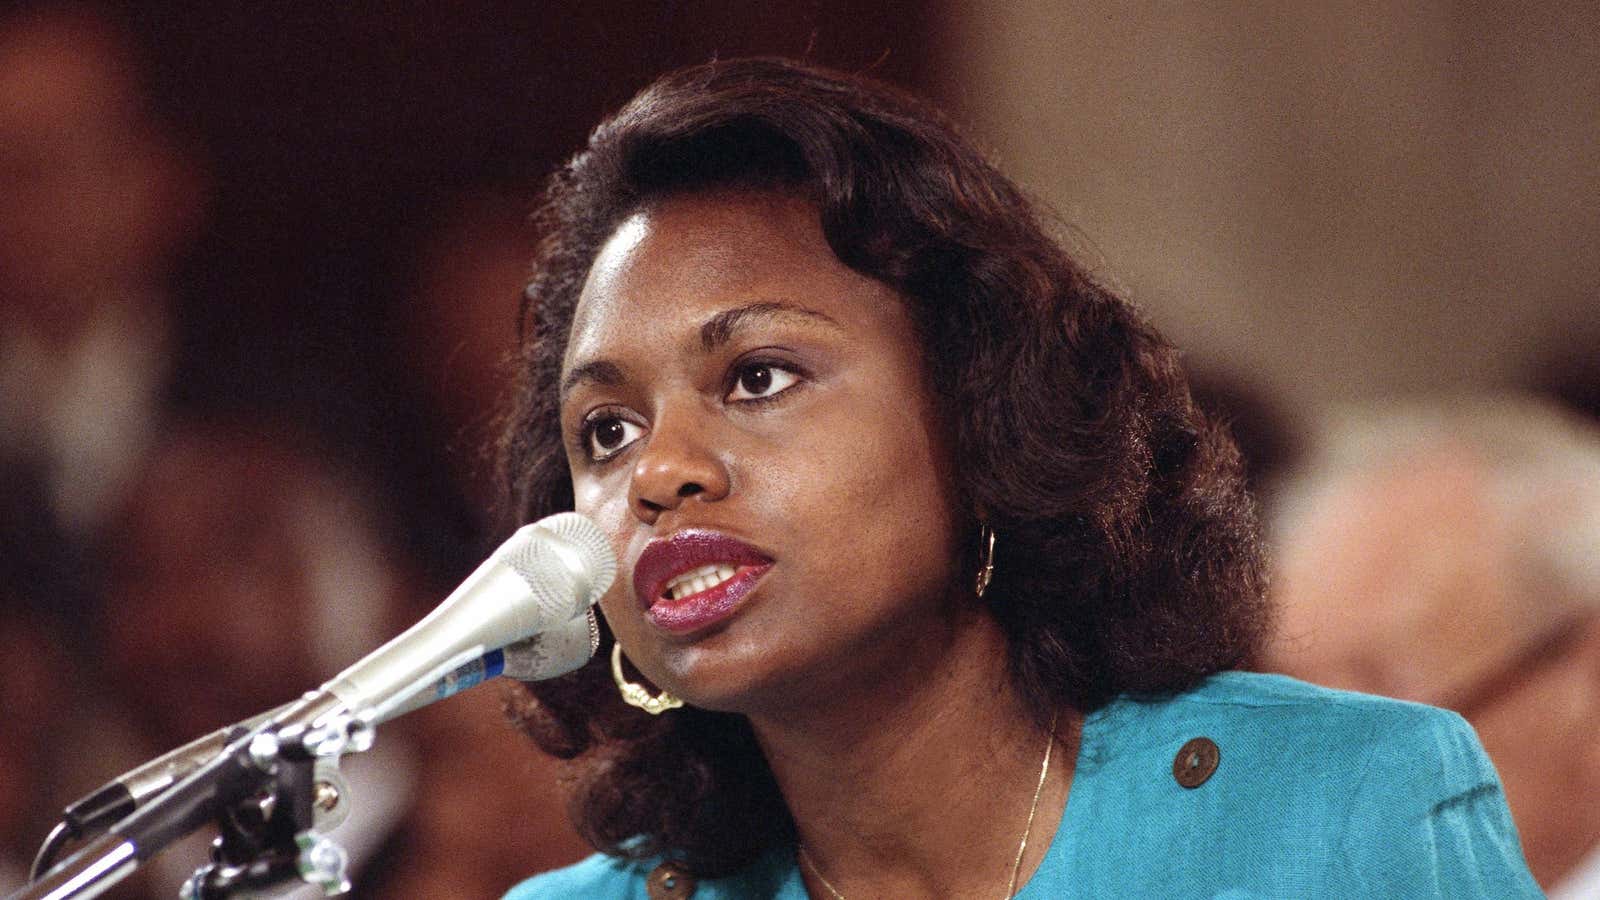 We would not be here without Anita Hill and others before her.